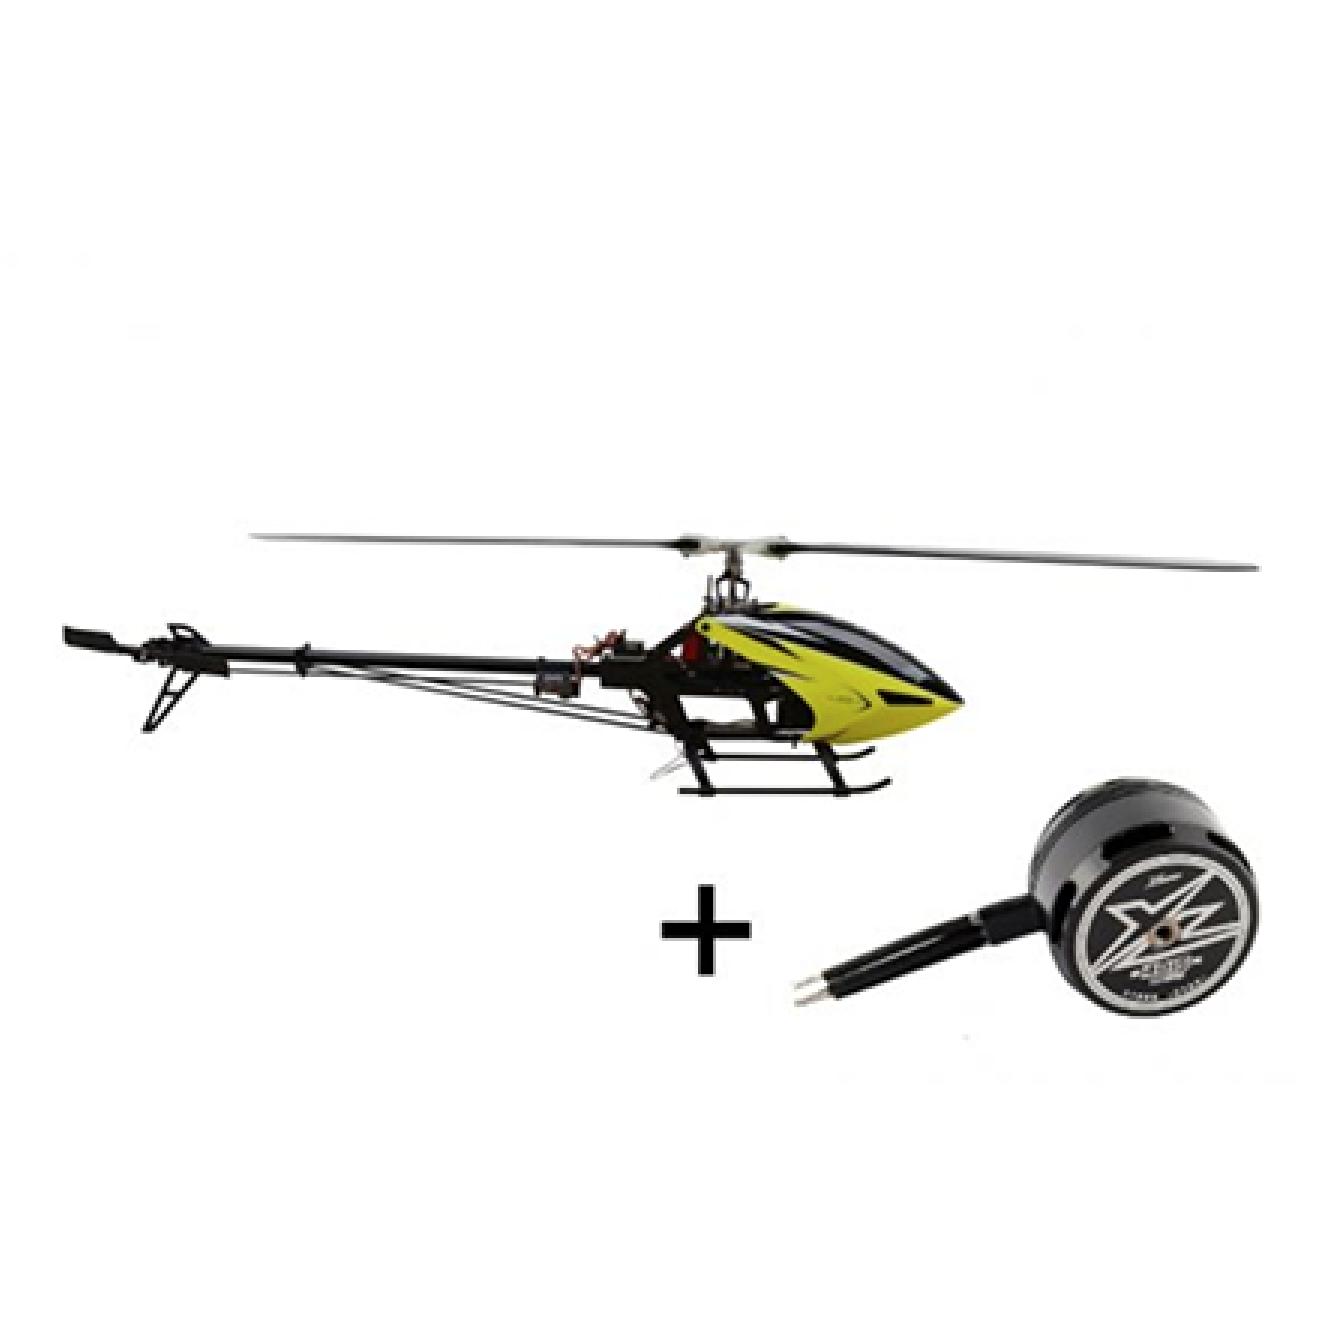 Xlpower Protos 480: Pros and cons of XLPOWER Protos 480 RC helicopter